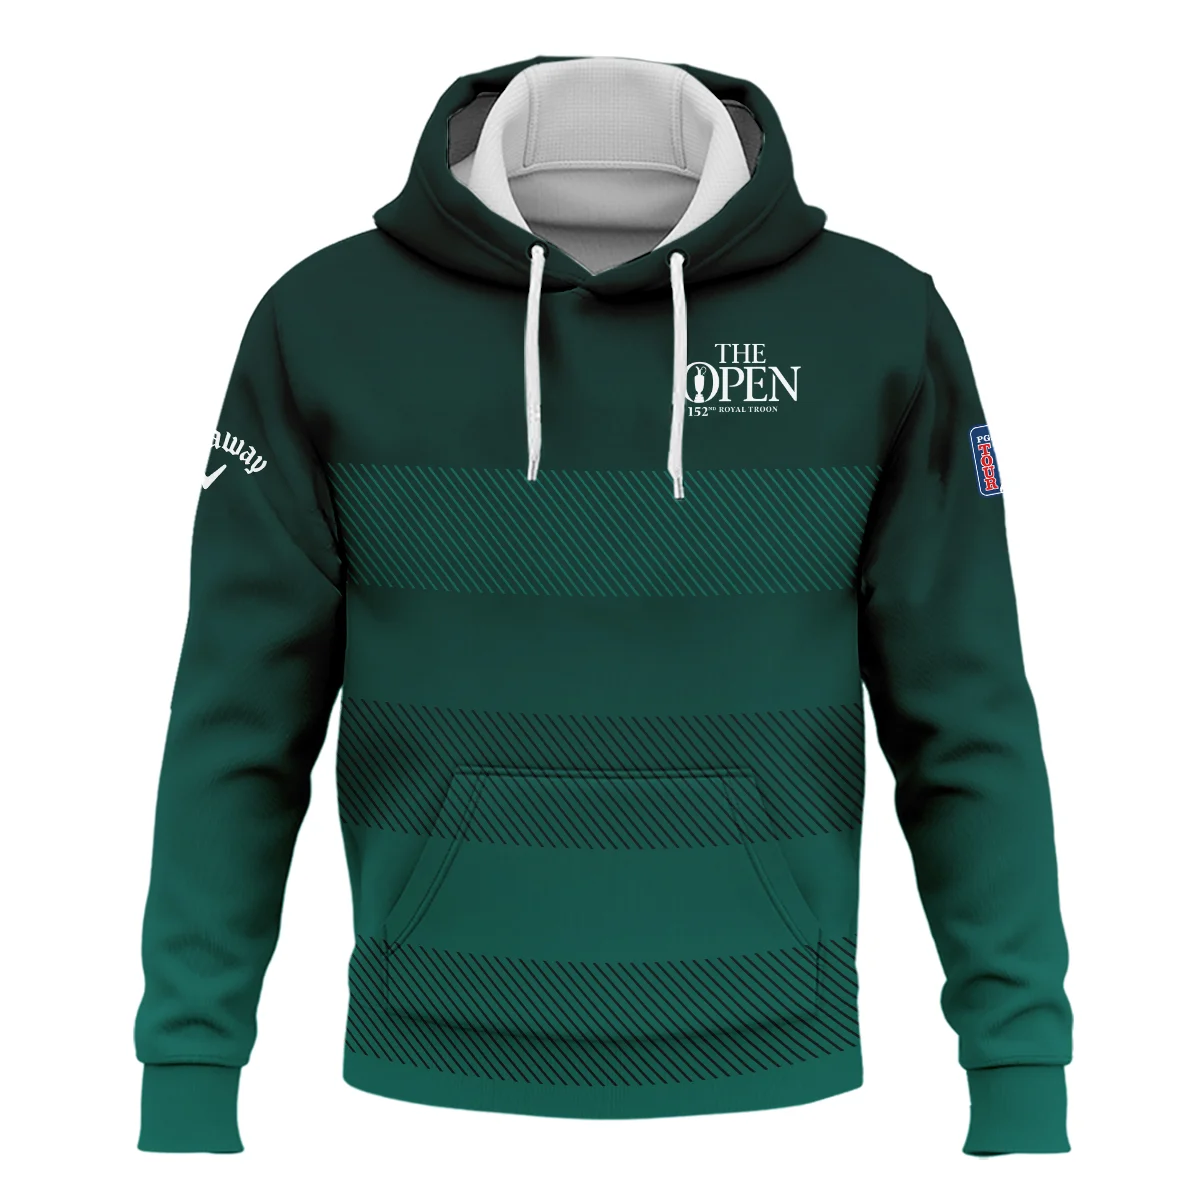 152nd Open Championship Callaway Dark Green Gradient Line Pattern Hoodie Shirt All Over Prints HOTOP280624A01CLWHD